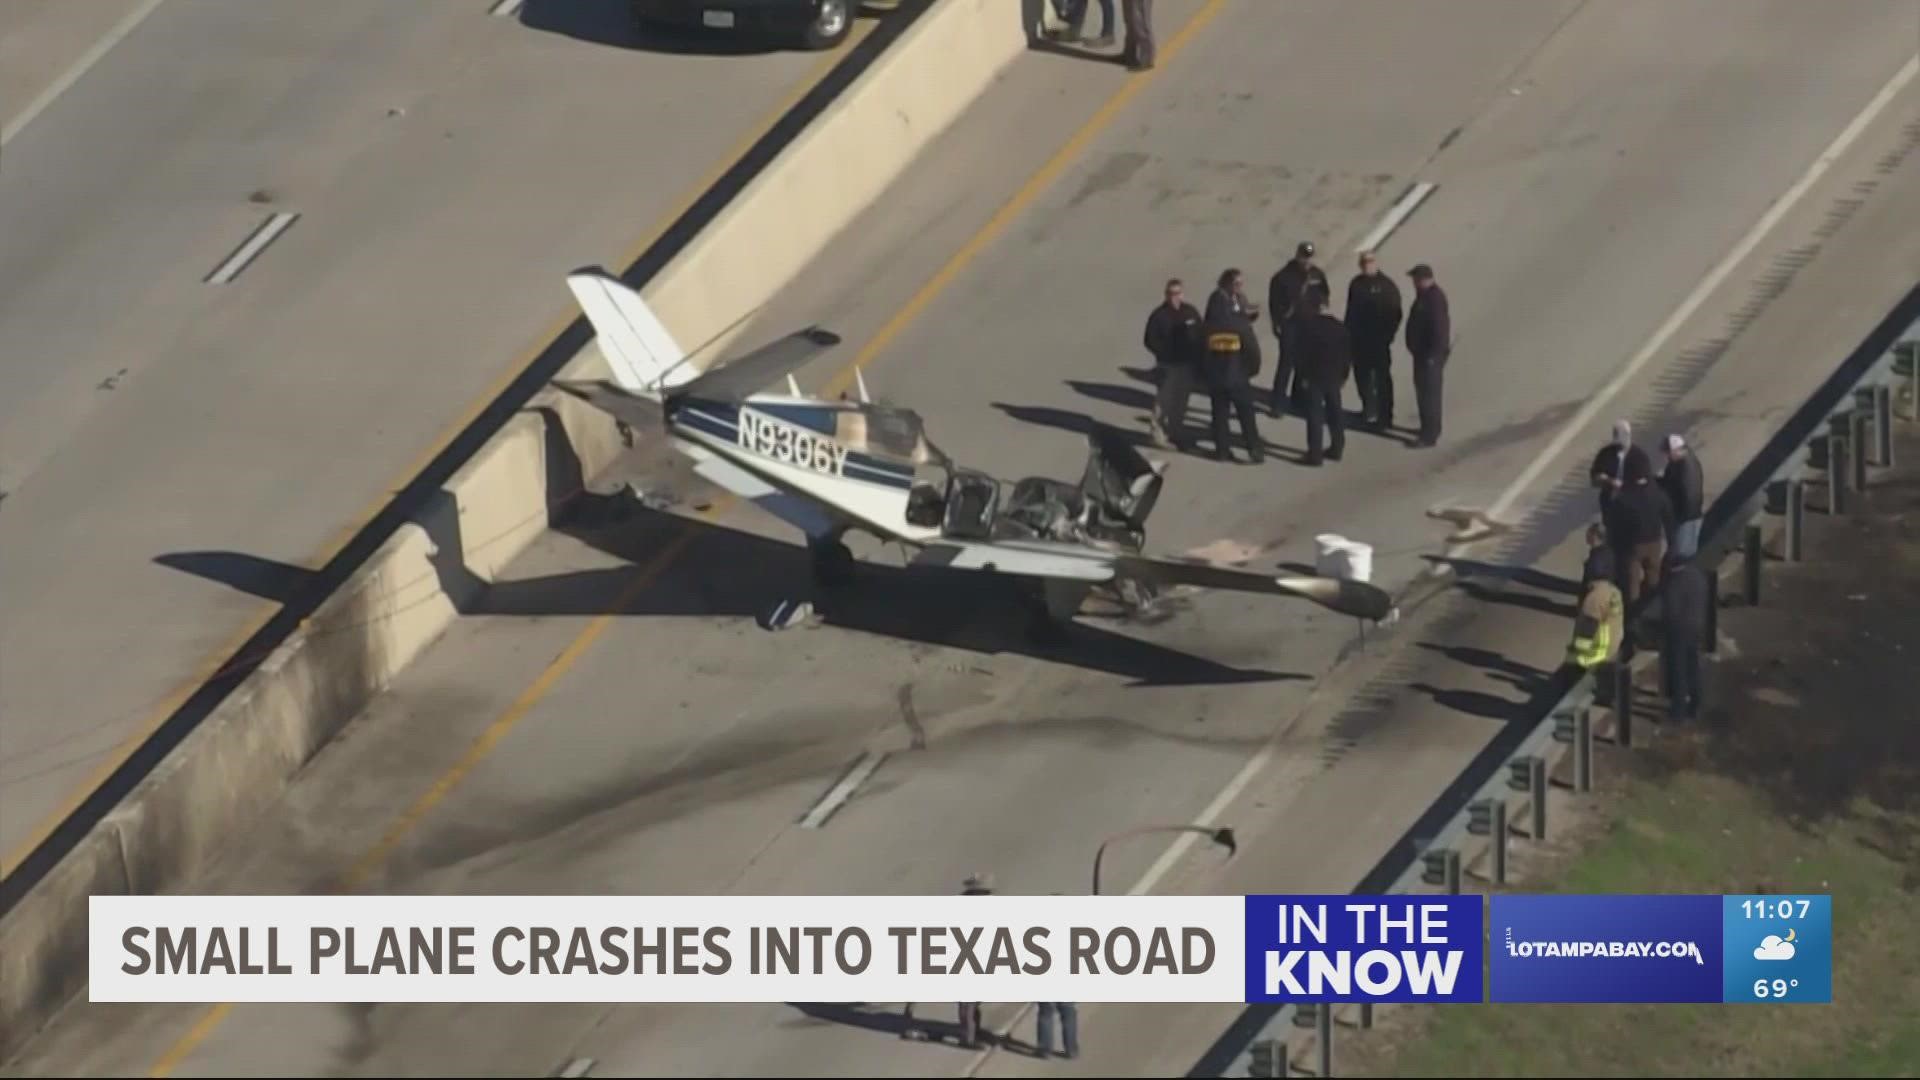 Officials said the plane actually hit the roof of an 18-wheeler on its way down. No injuries were reported.